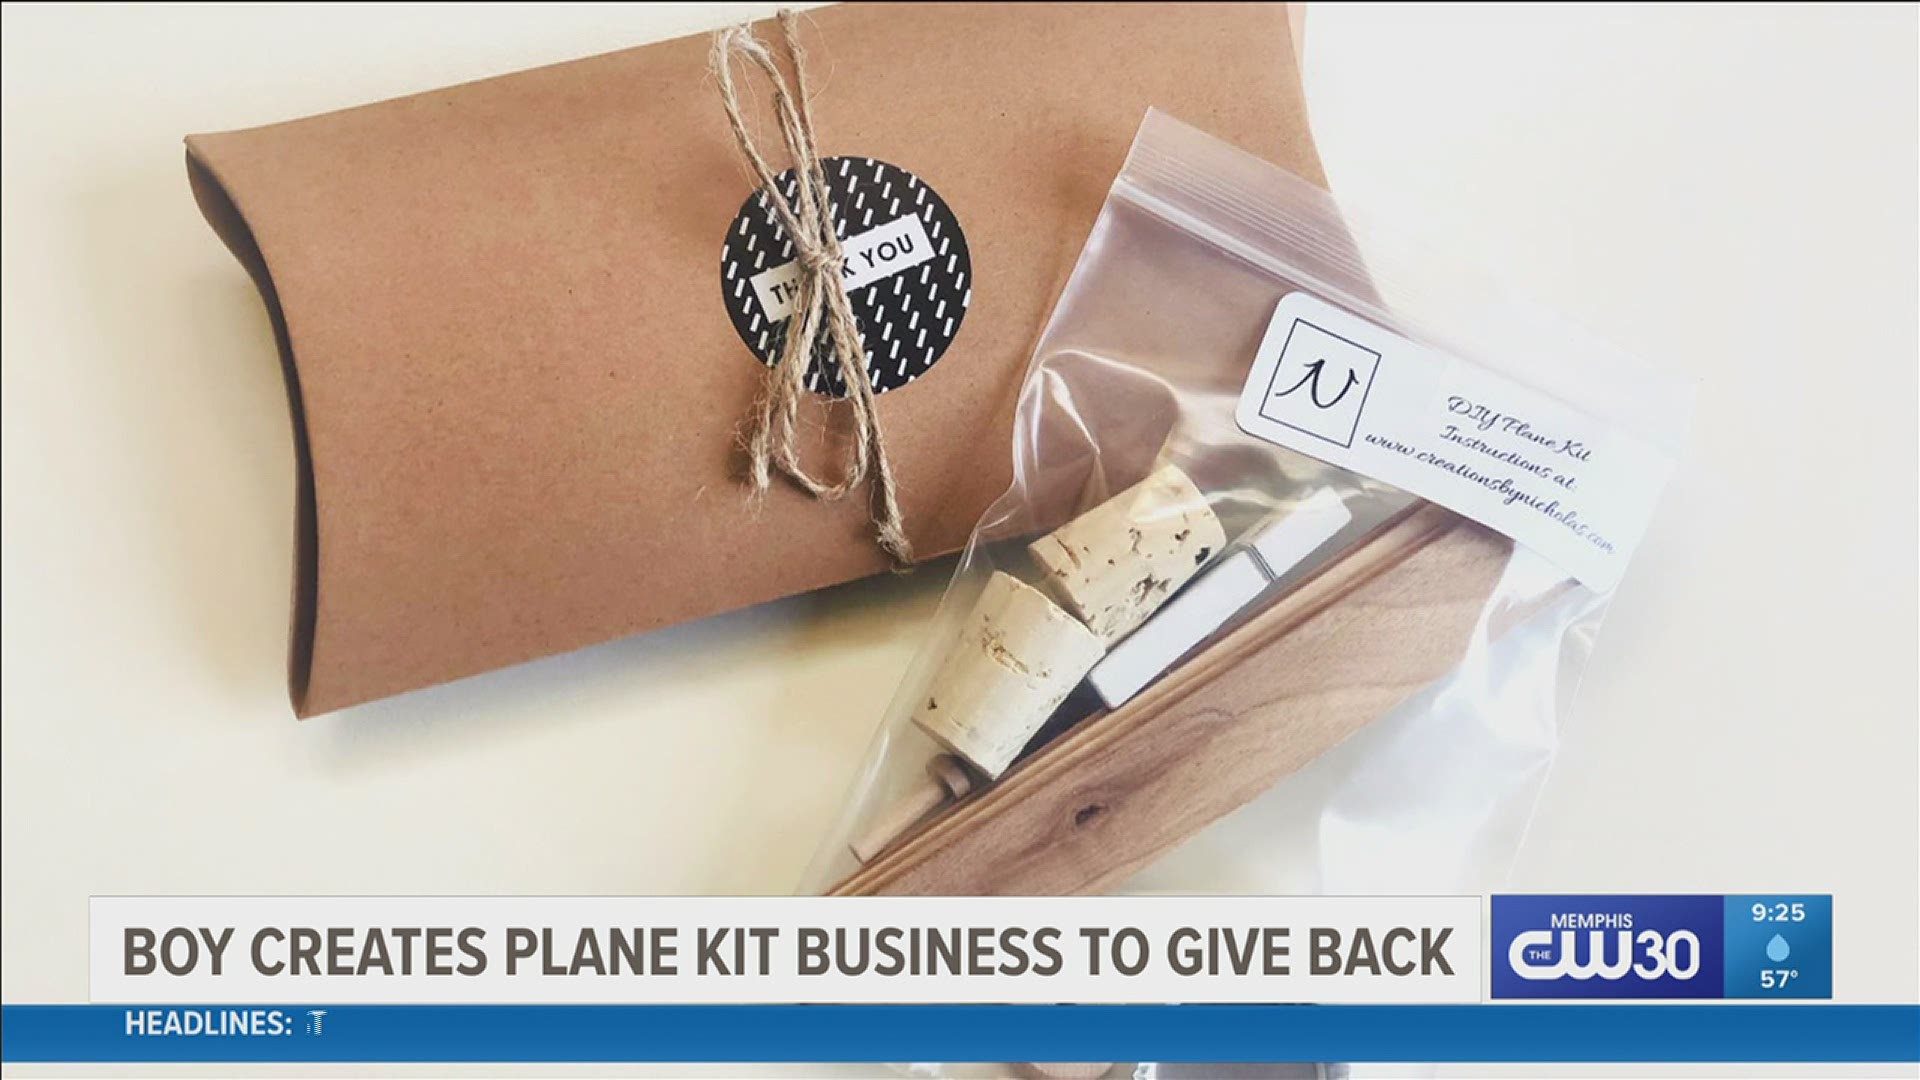 "One day my mom told me to start a business during coronavirus. I made this cool plane, but I wanted to turn it into a kit," said the kidpreneur.